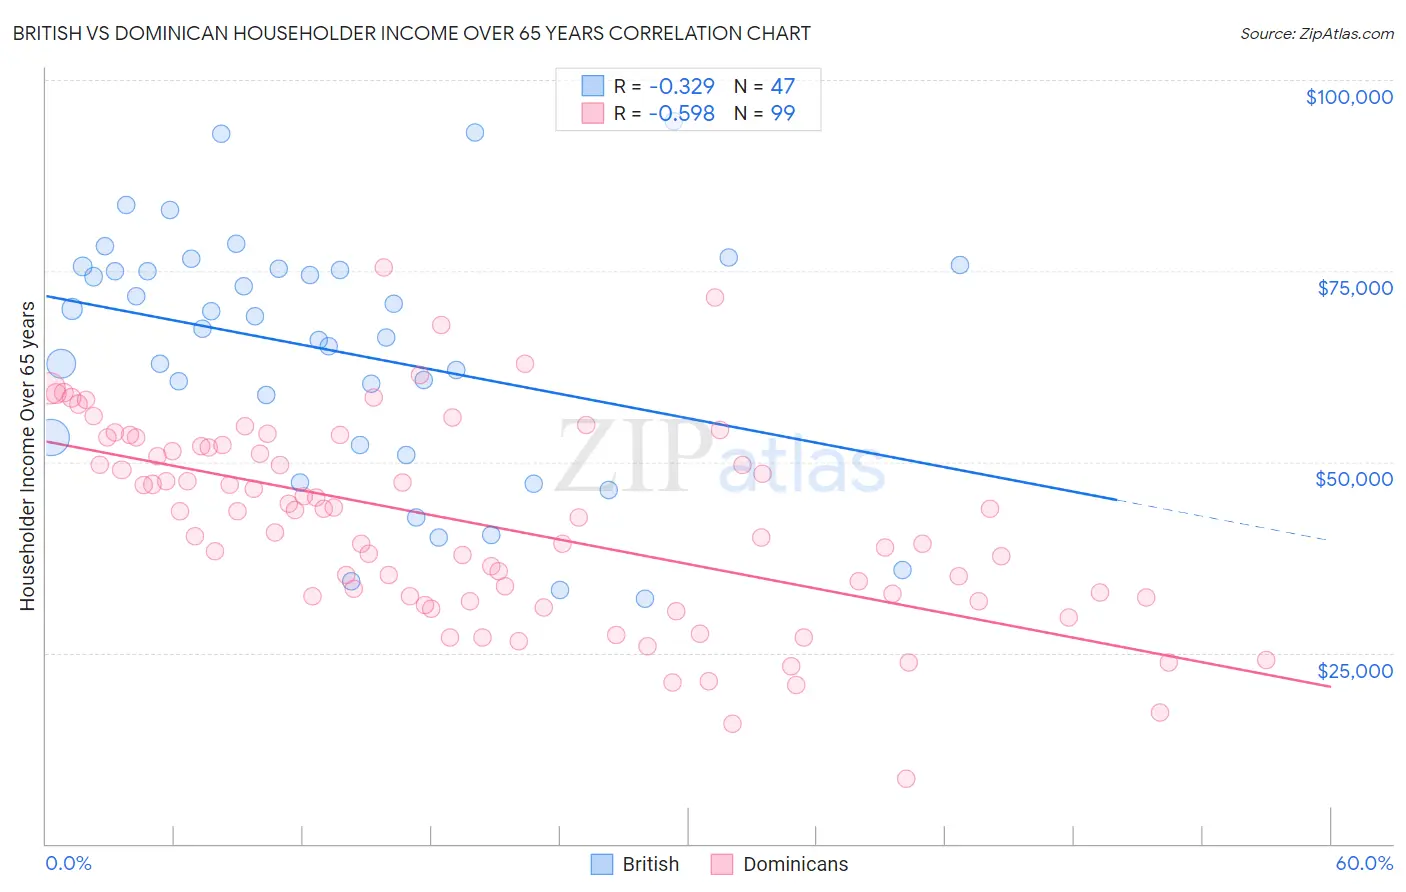 British vs Dominican Householder Income Over 65 years